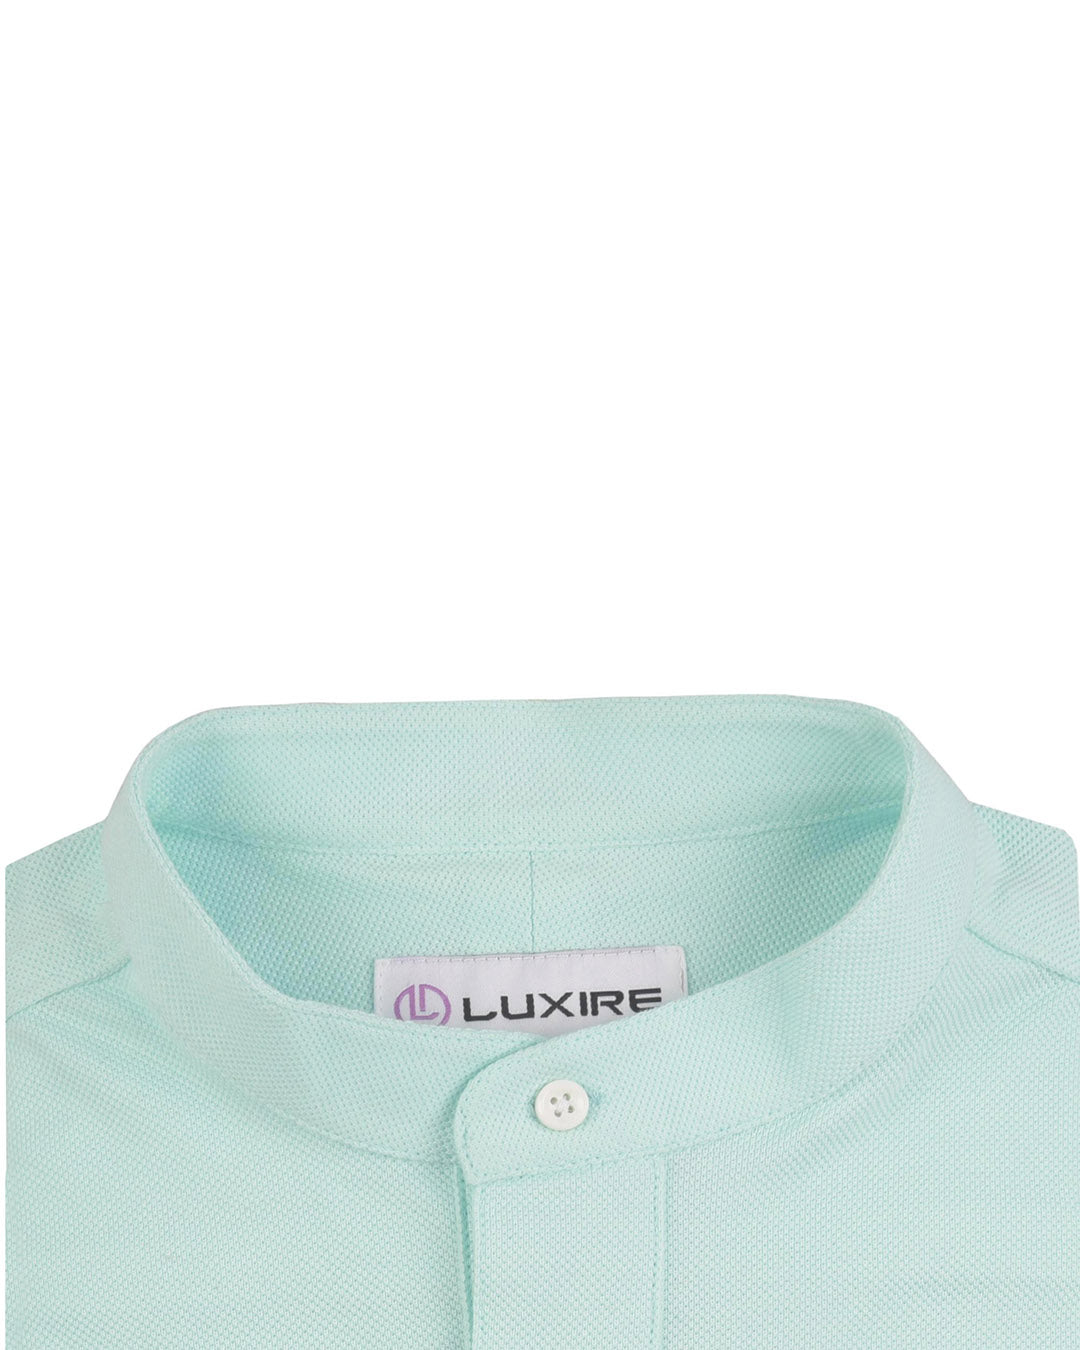 Collar of the custom oxford polo shirt for men by Luxire in mid blue